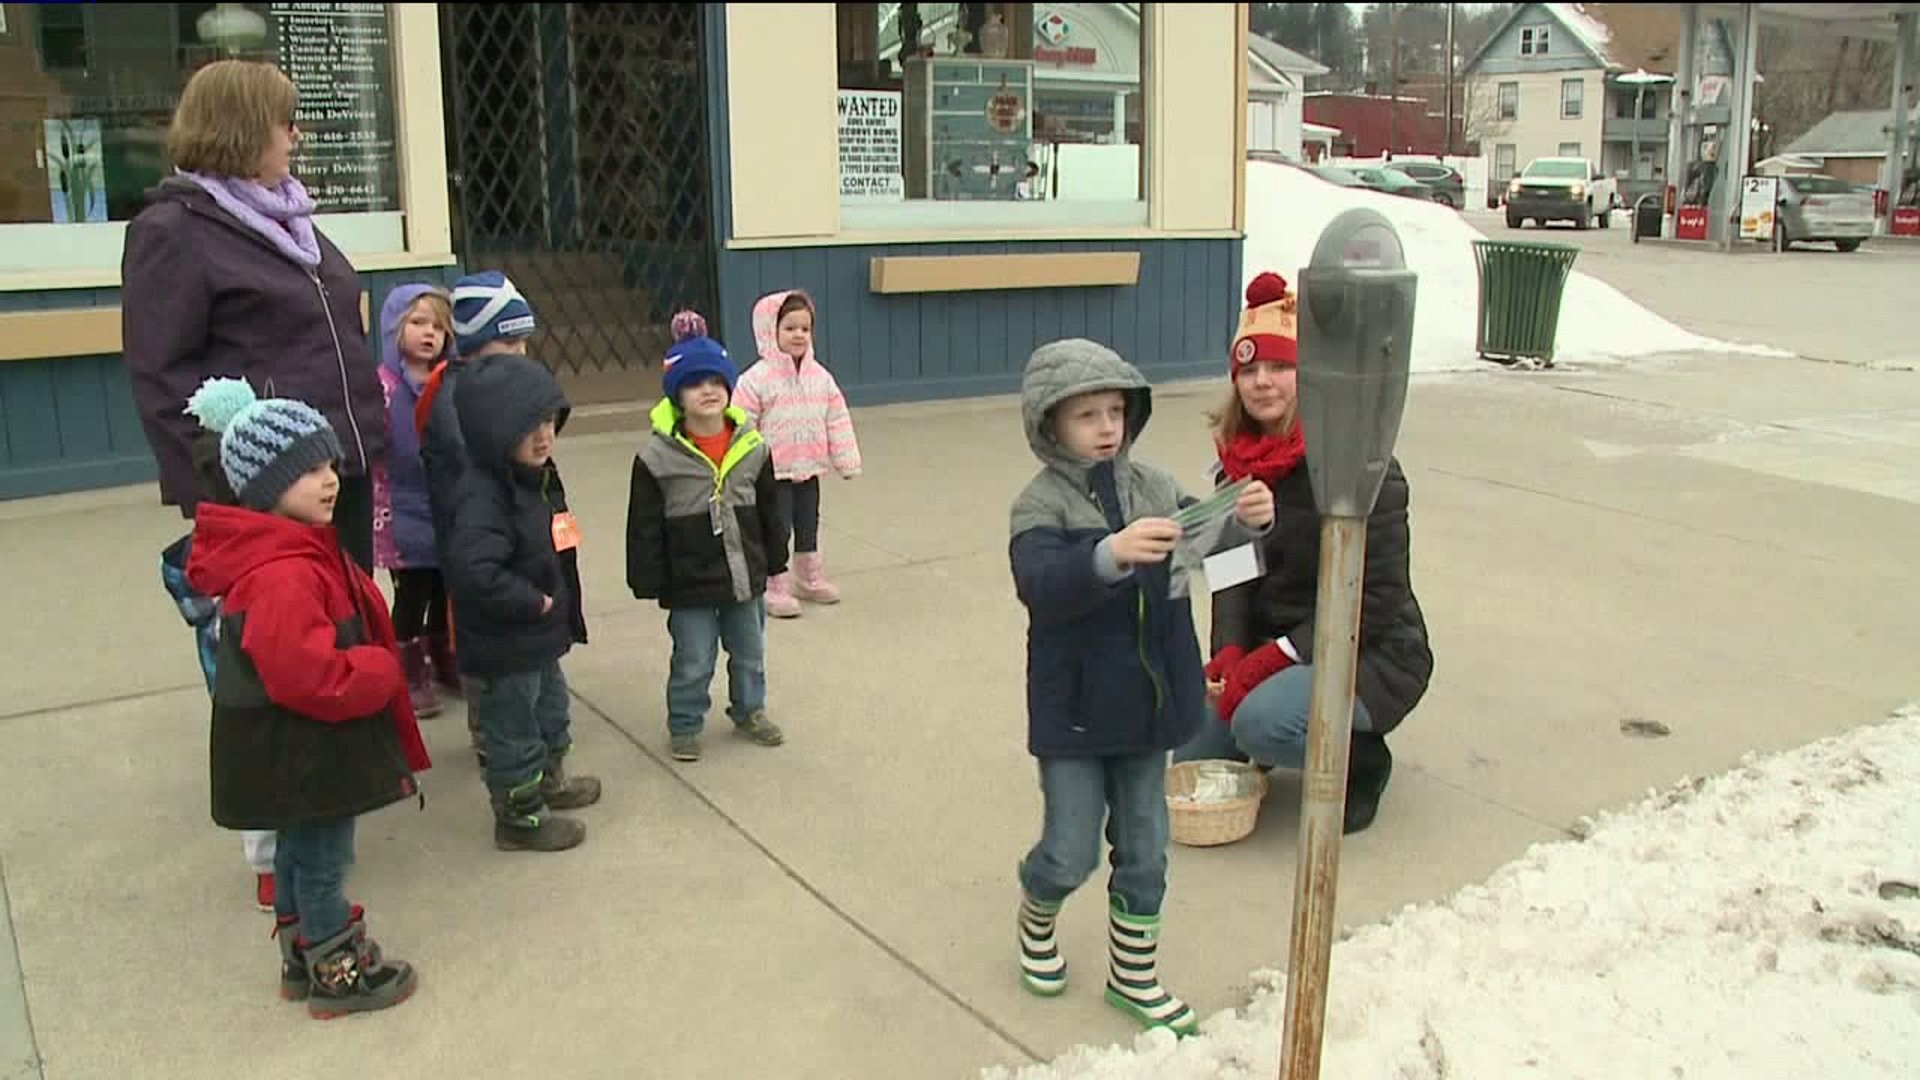 Random Acts of Kindess for Some School Kids in Honesdale